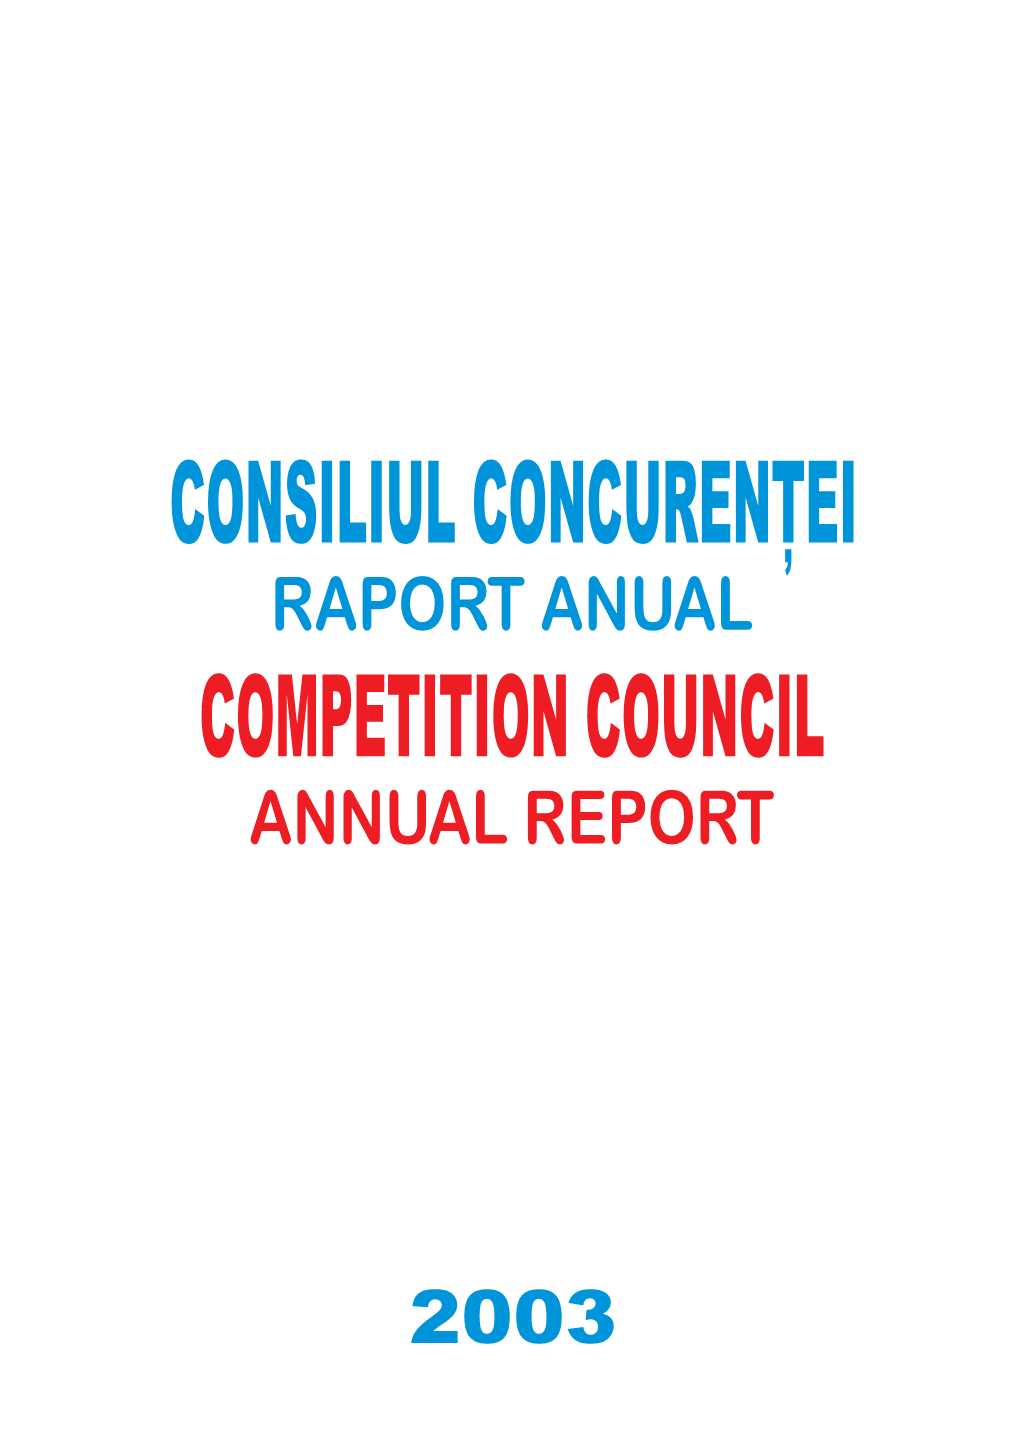 Annual Report Year 2003